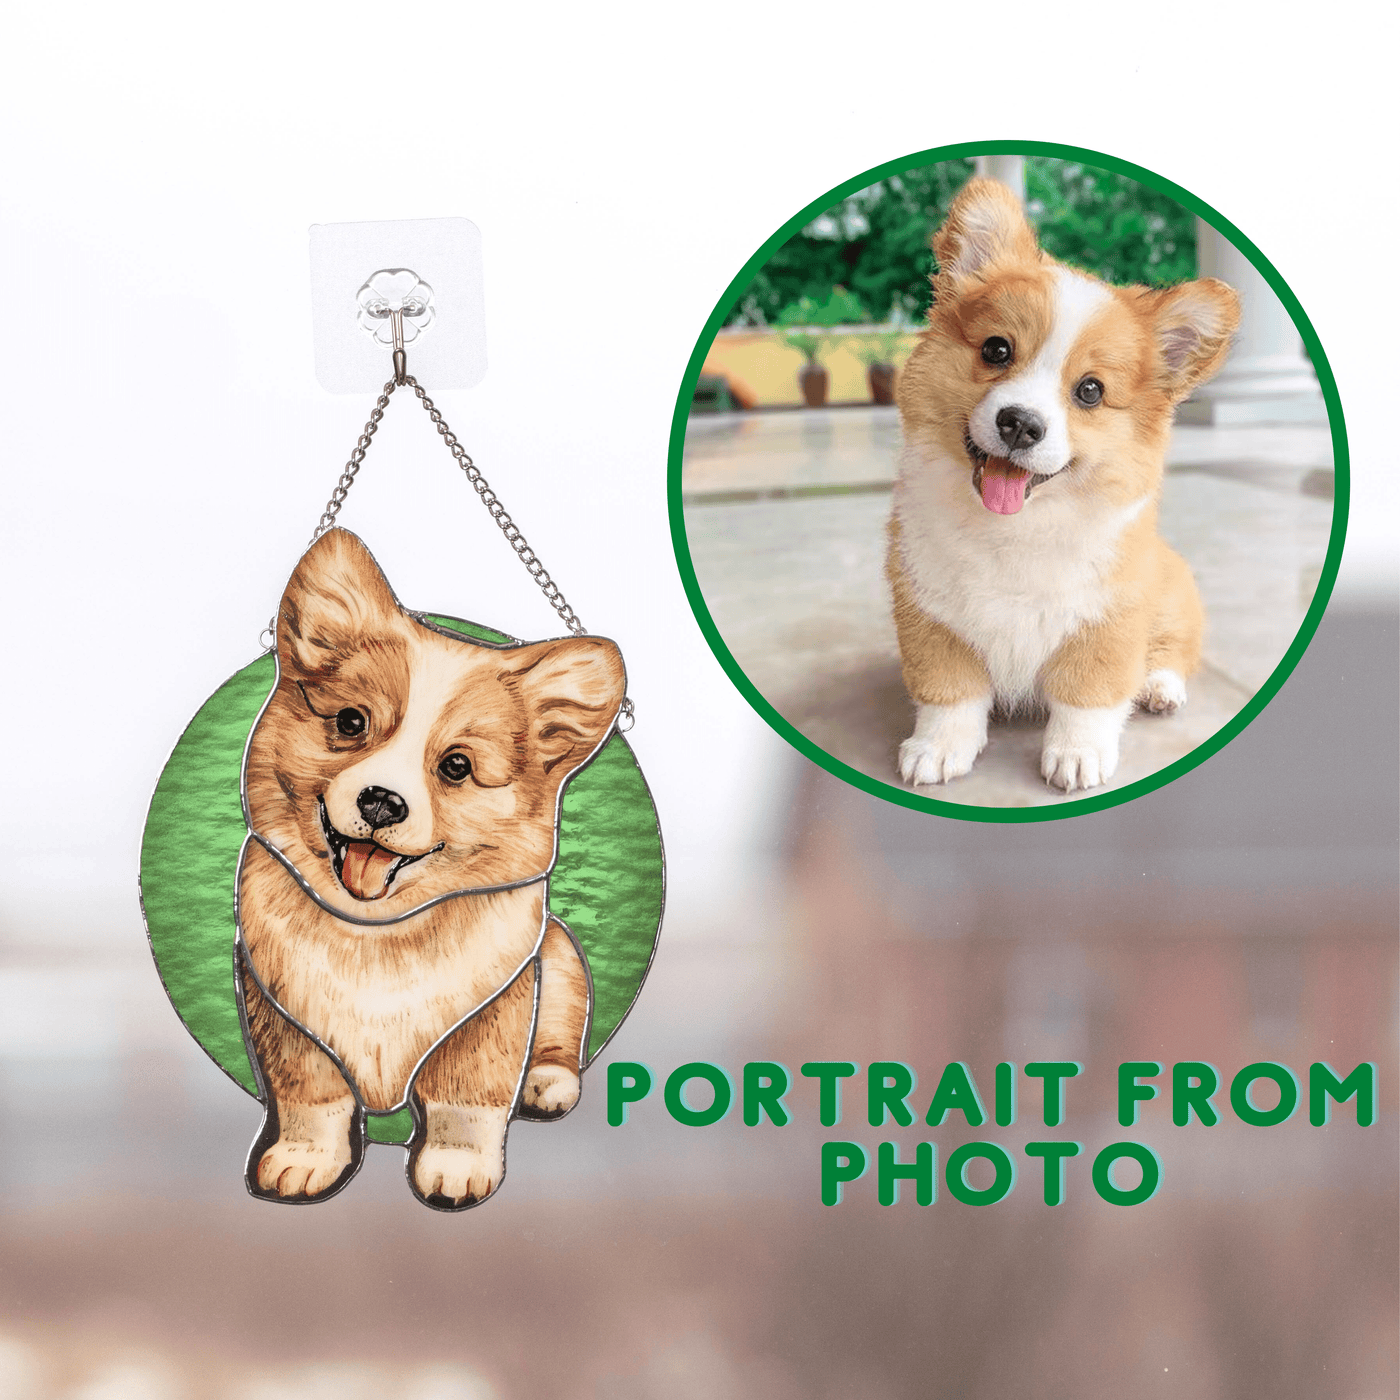 Hand-painted stained glass dog portrait in comparison with the real dog photo